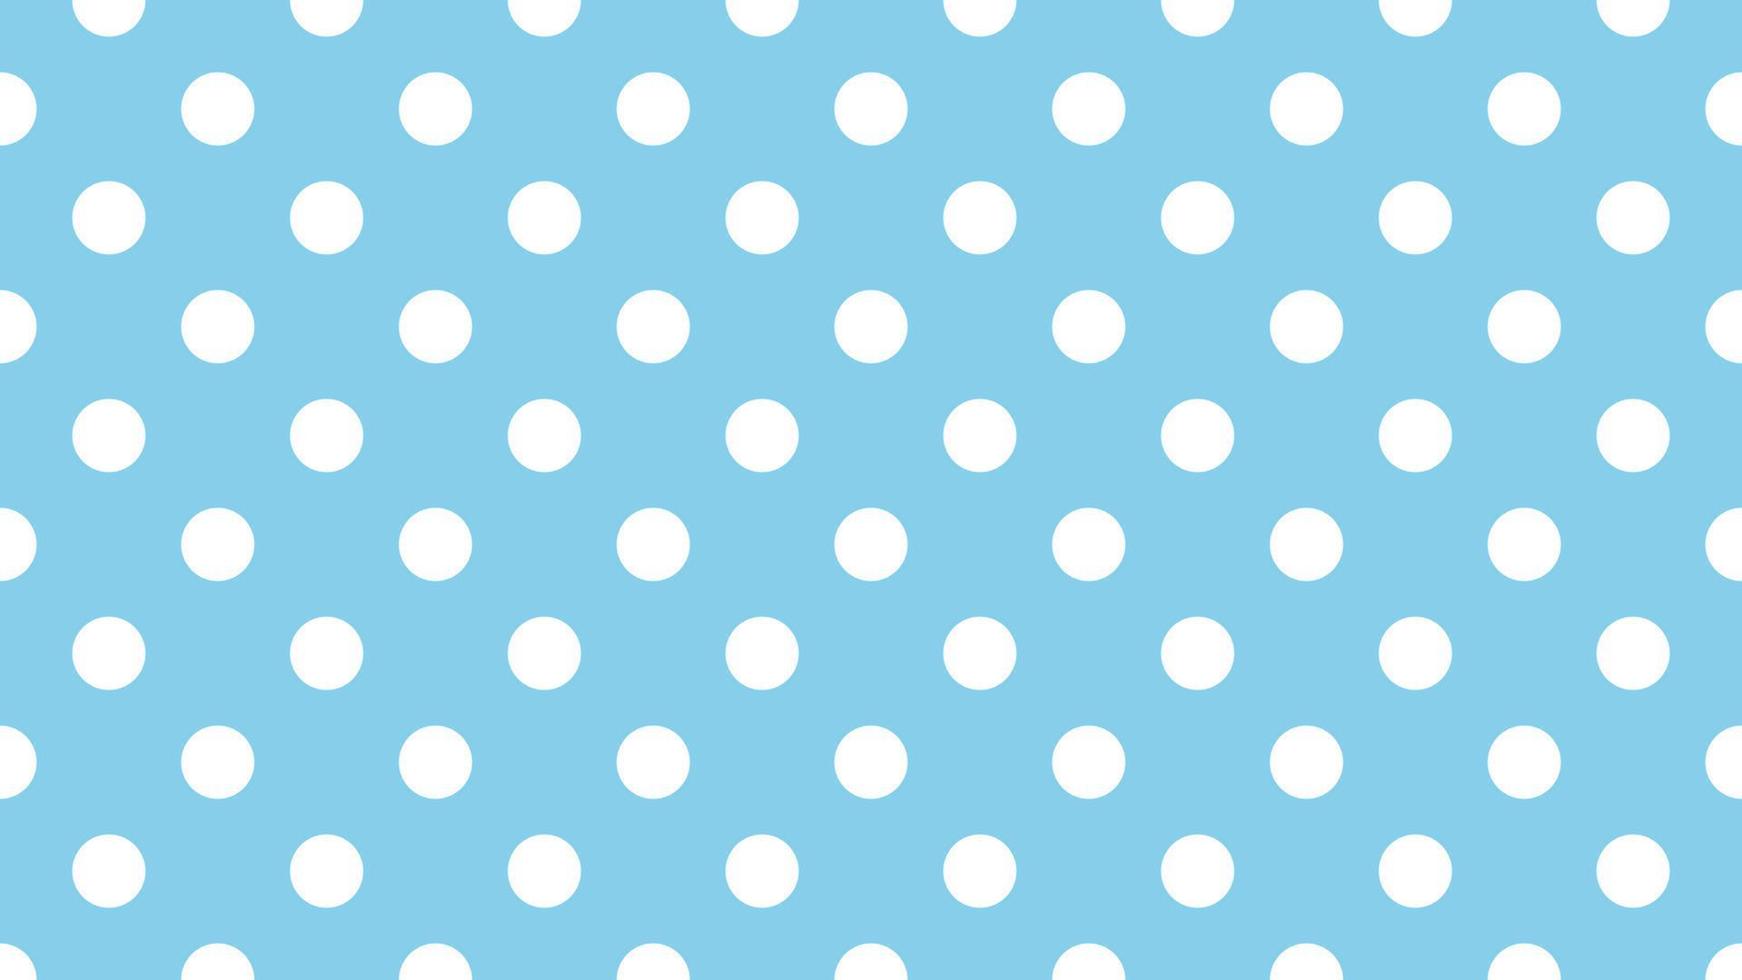 white color polka dots over sky blue background vector